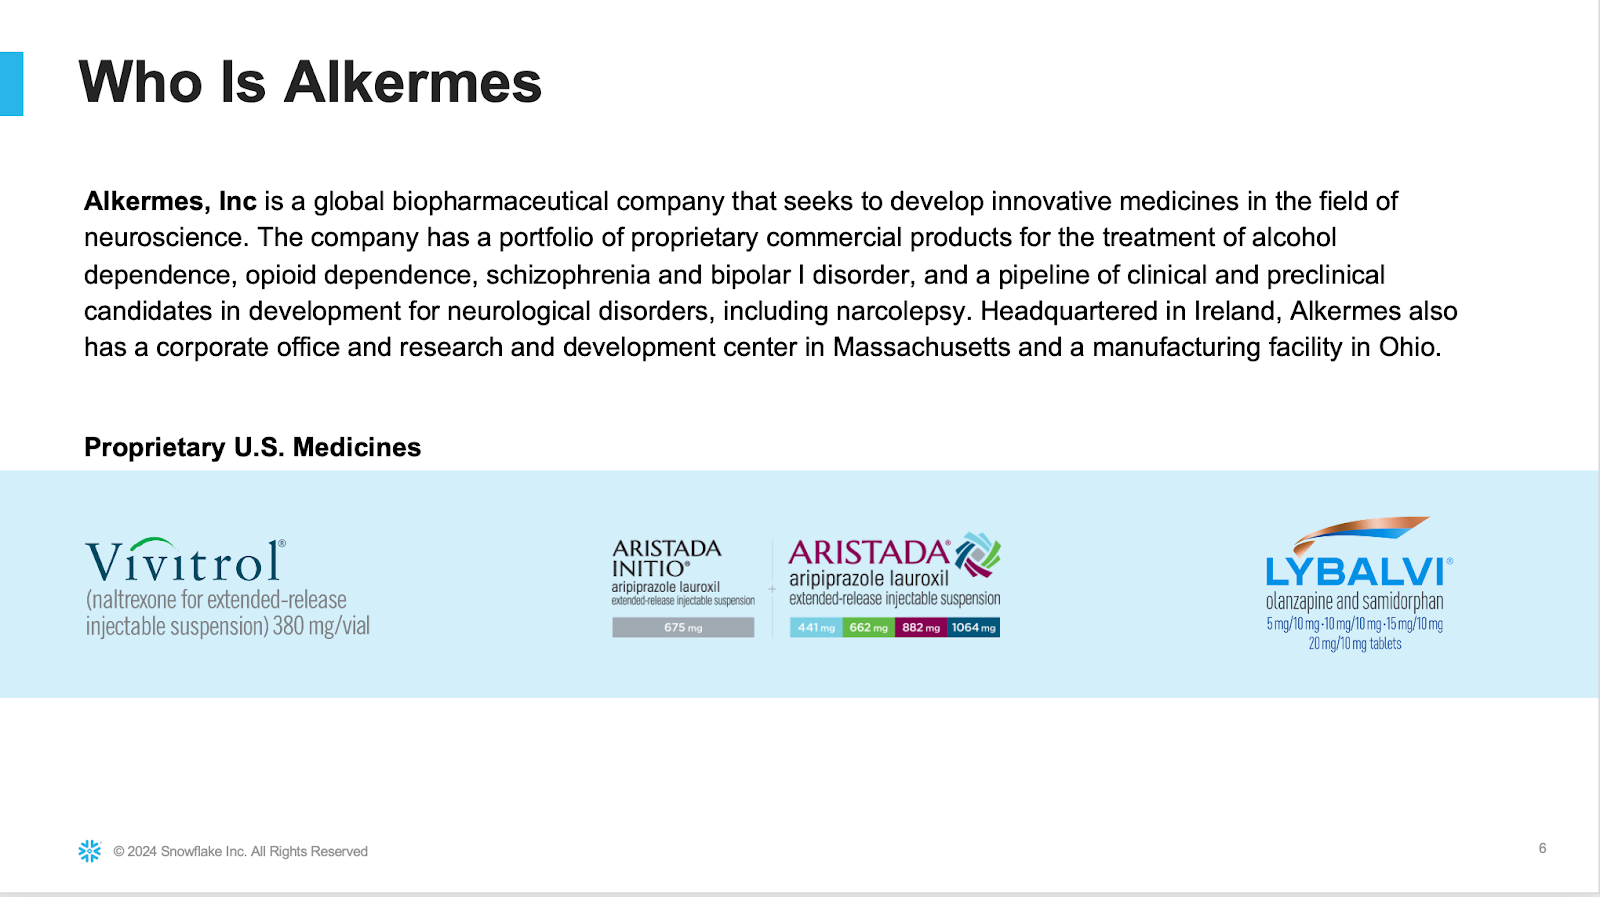 A slide about the biopharma company Alkermes from Snowflake Summit 2024